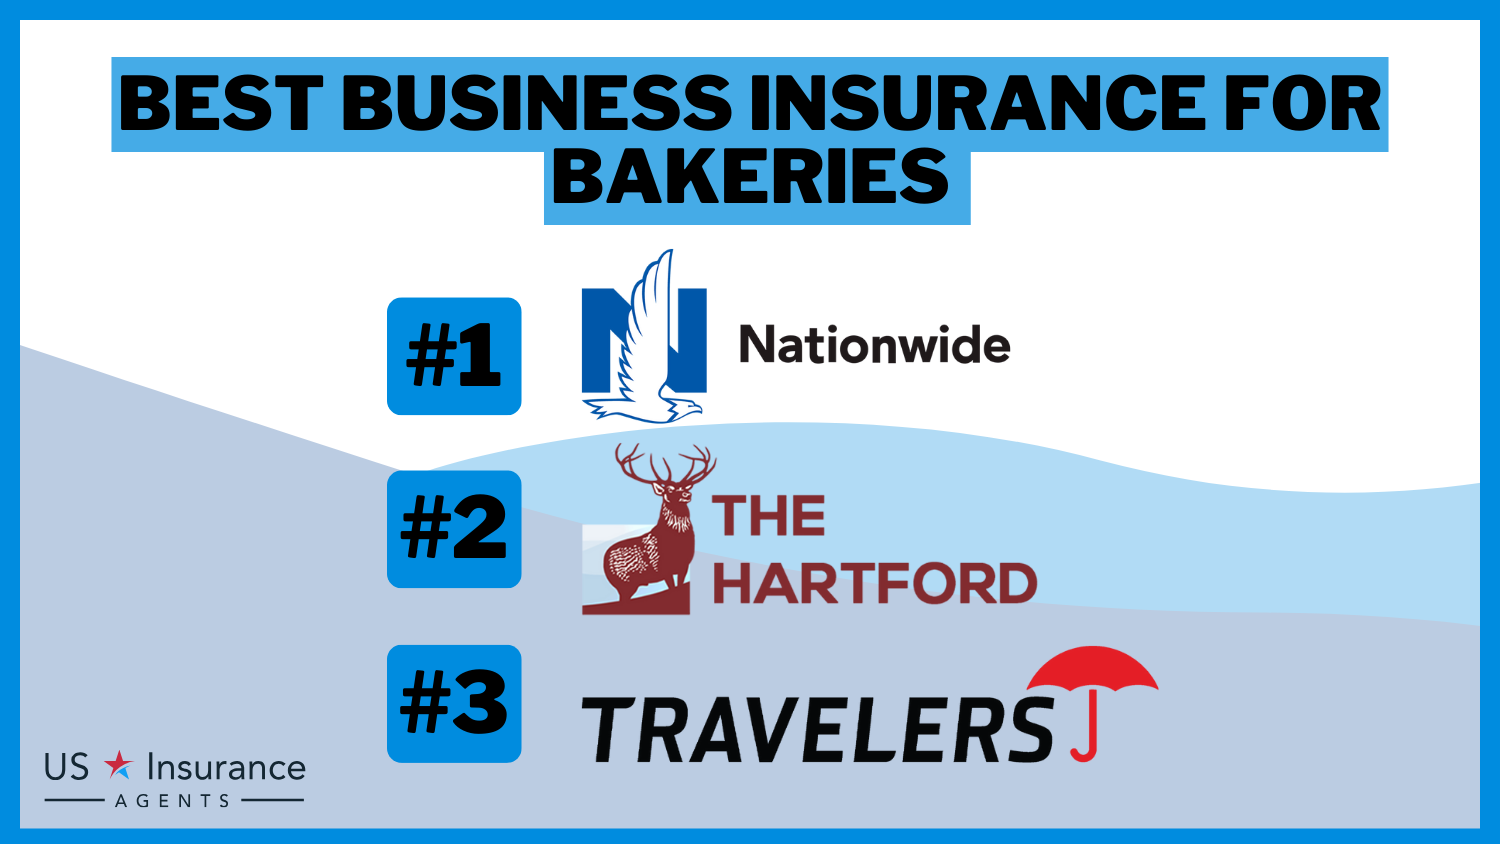 3 Best Business Insurance Companies for Bakeries: Nationwide, The Hartford and Travellers.